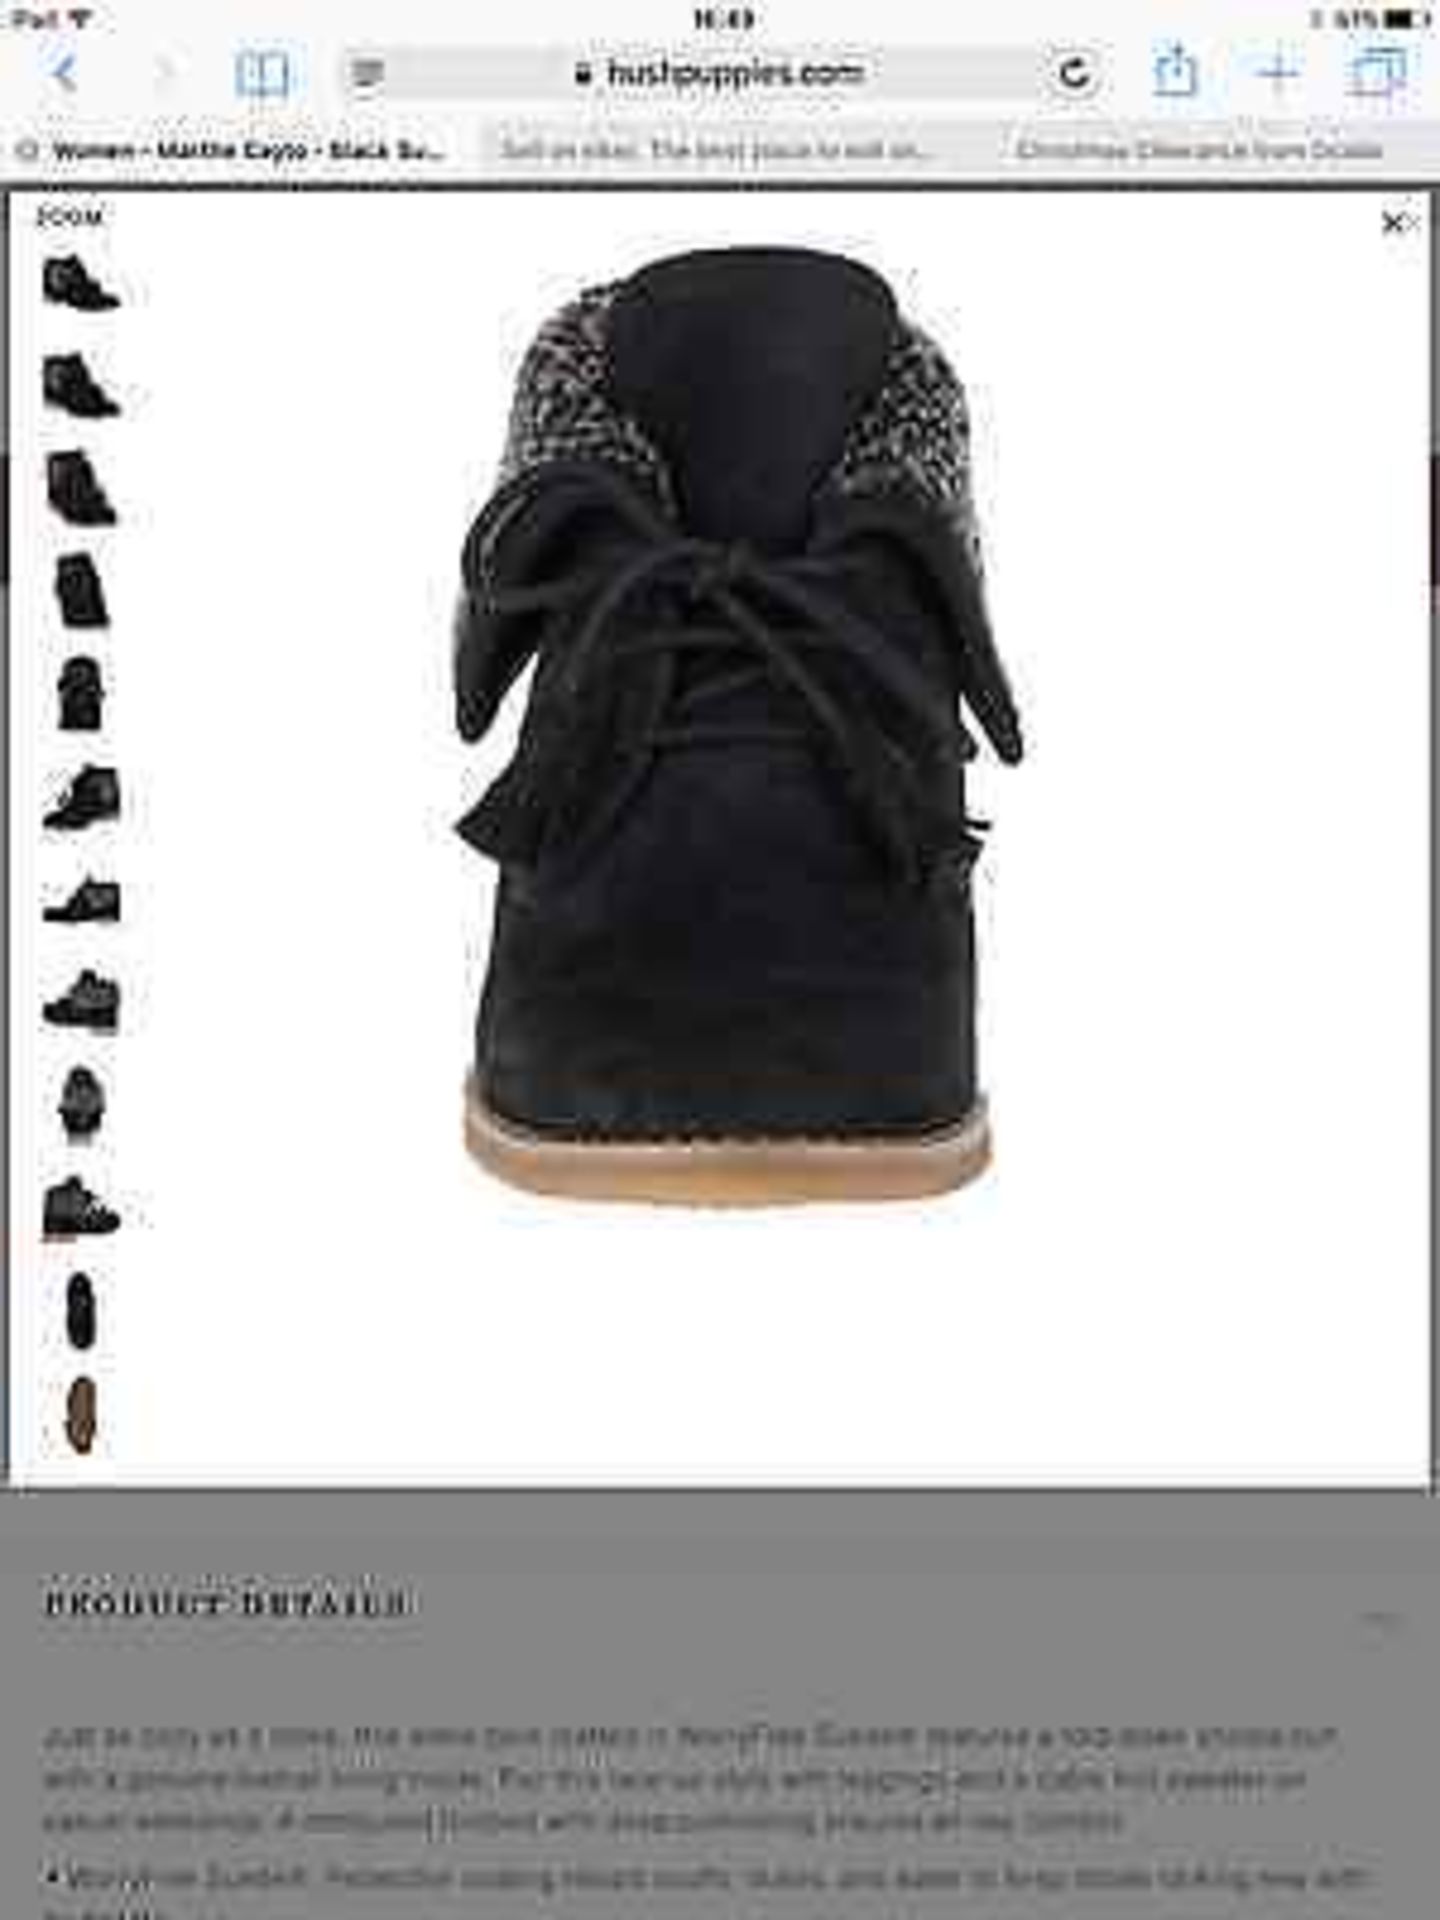 Hush Puppies Black Suede Martha Cayto Ankle Boot, Size UK 7, RRP £100 (New with box) - Image 6 of 12